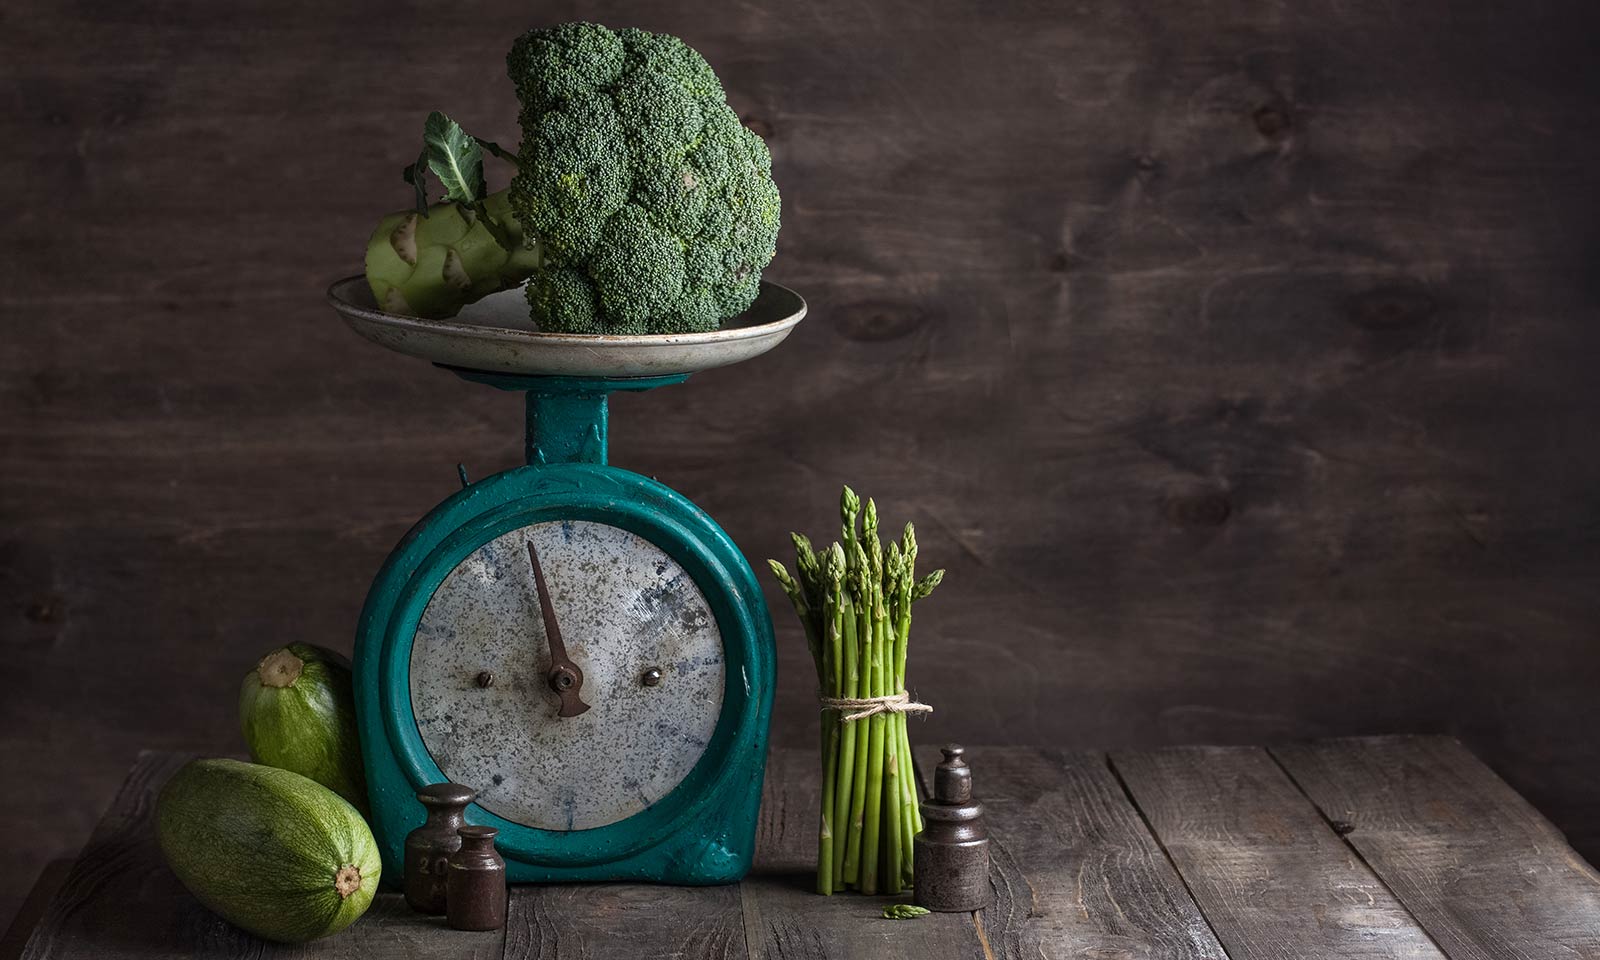 Food Scales: Why Weighing Your Food Is Important